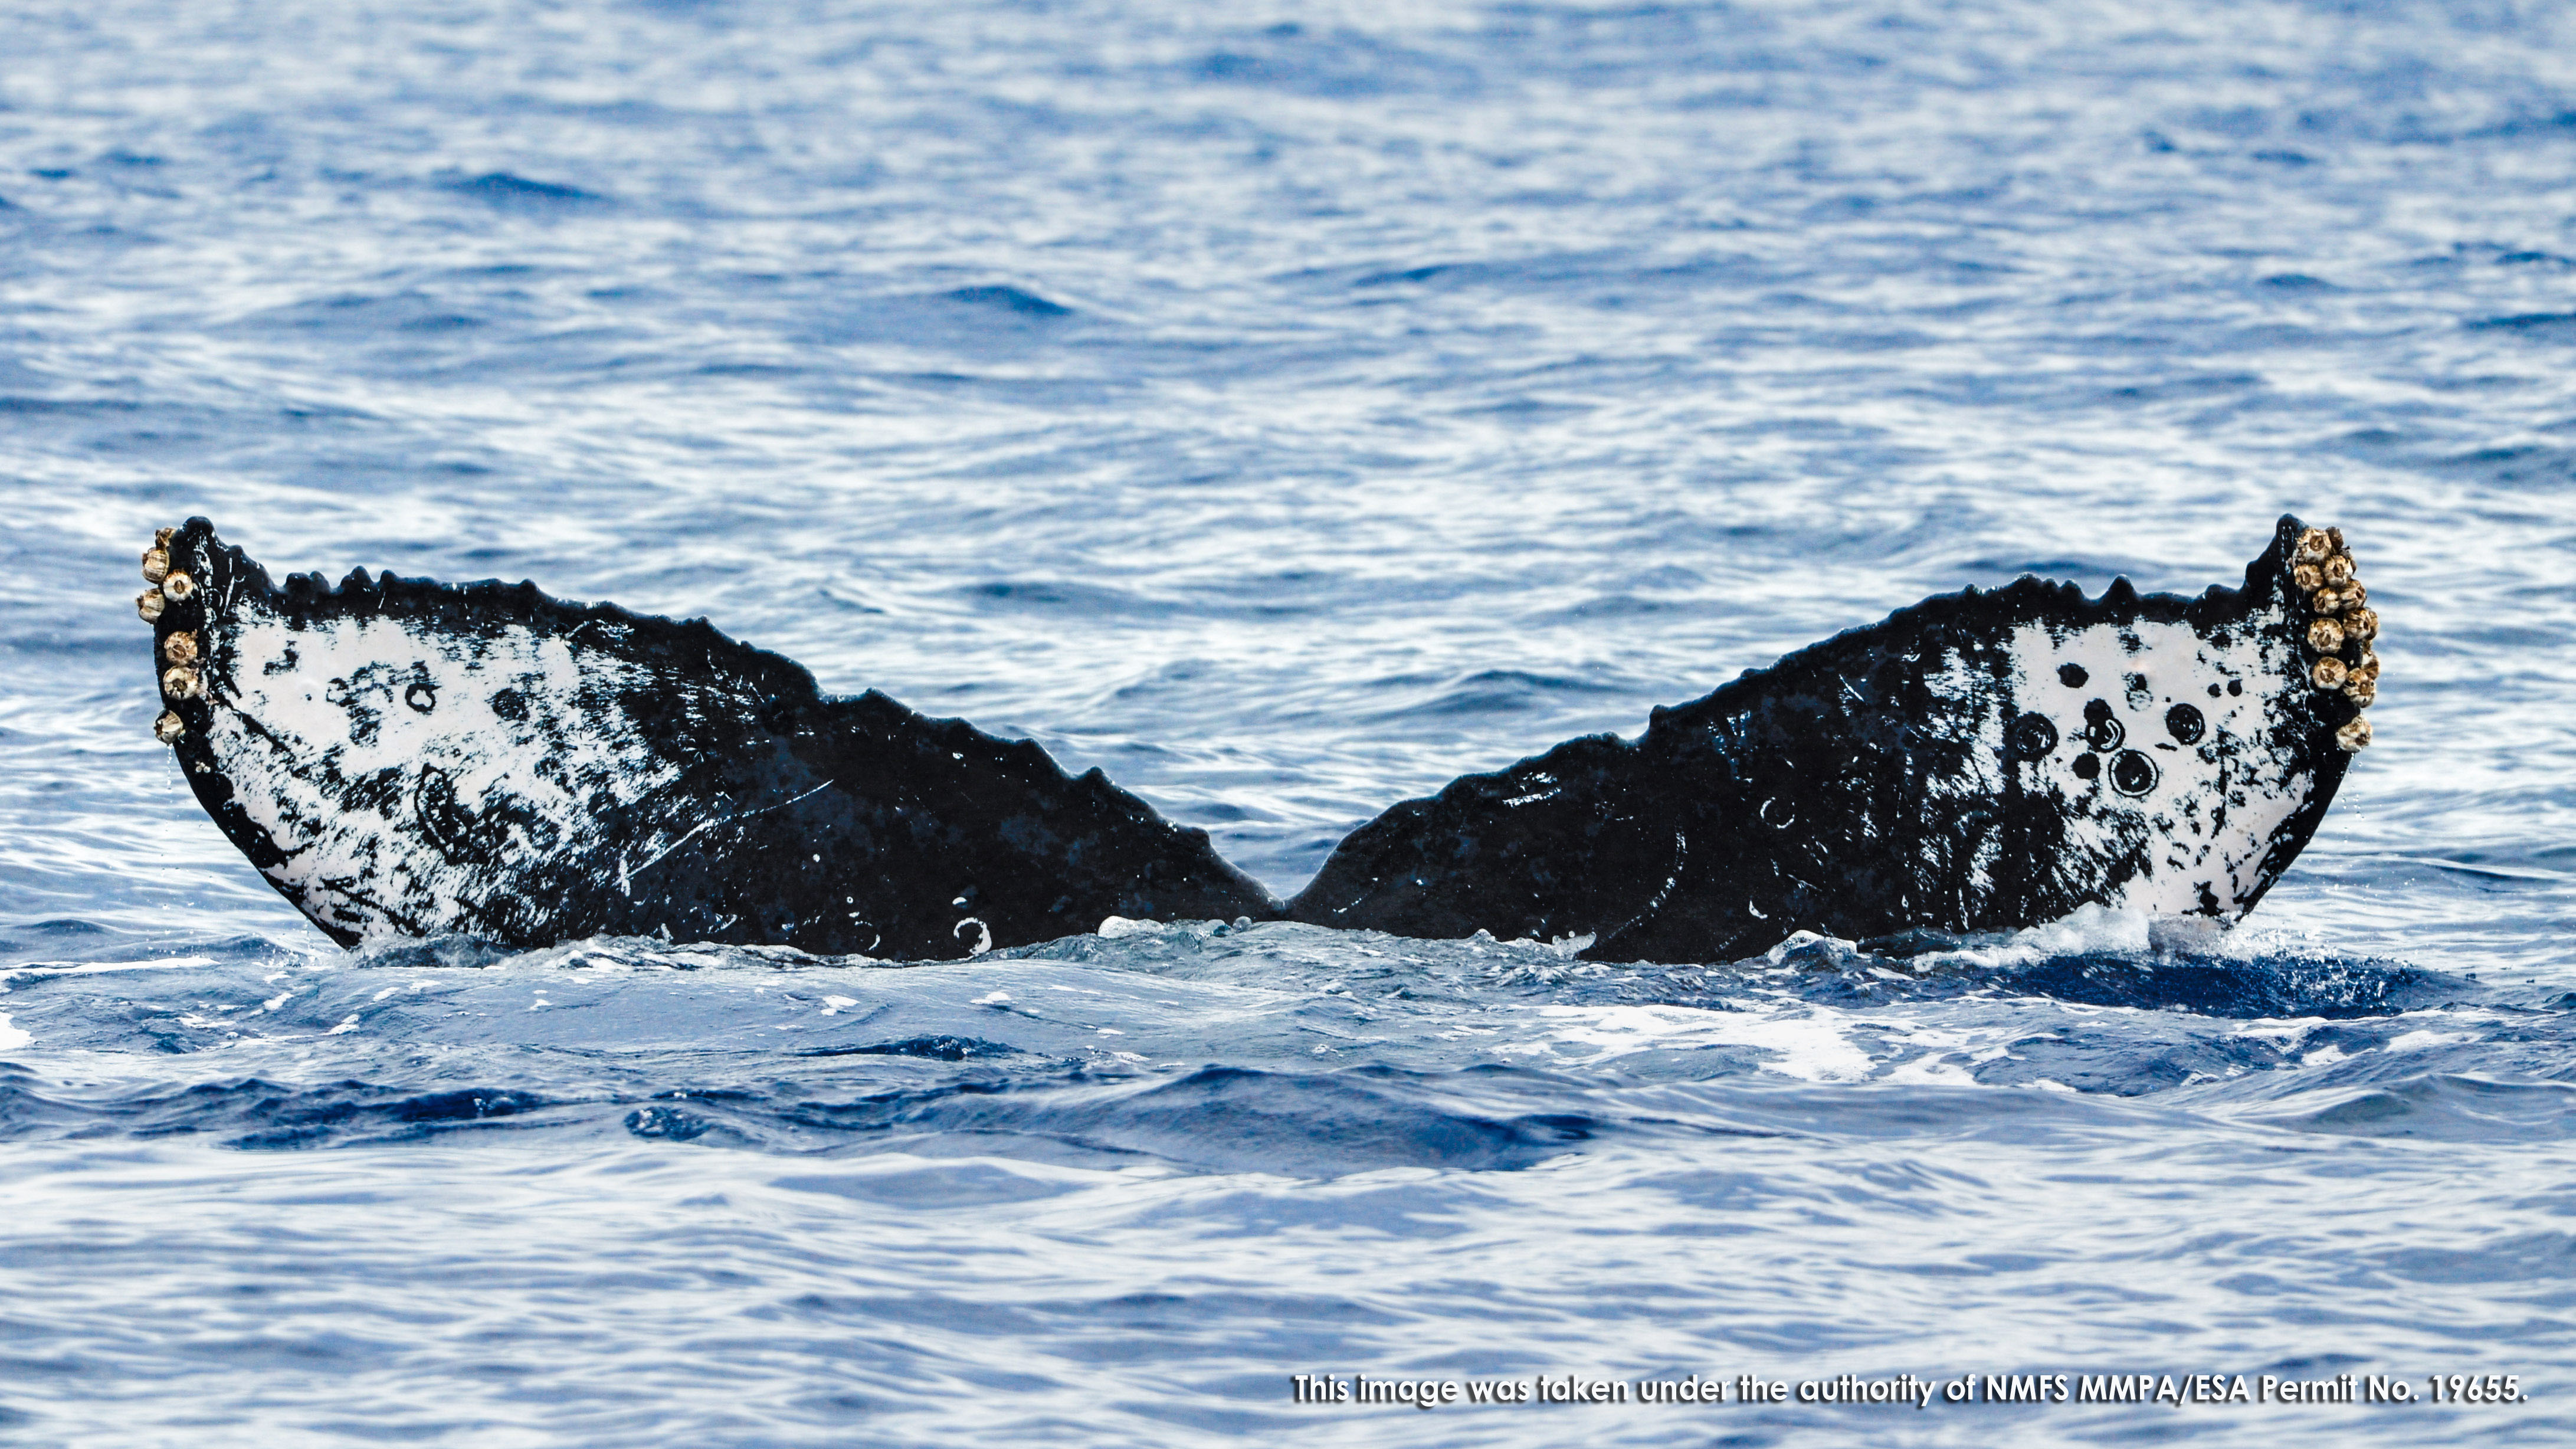 Discover the elaborate, haunting breeding songs of humpback whales